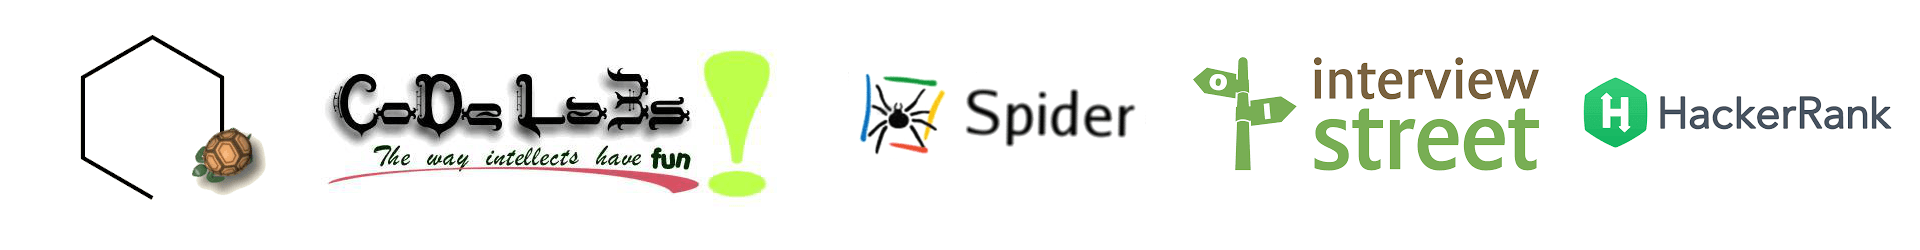 Spider SMS up and running